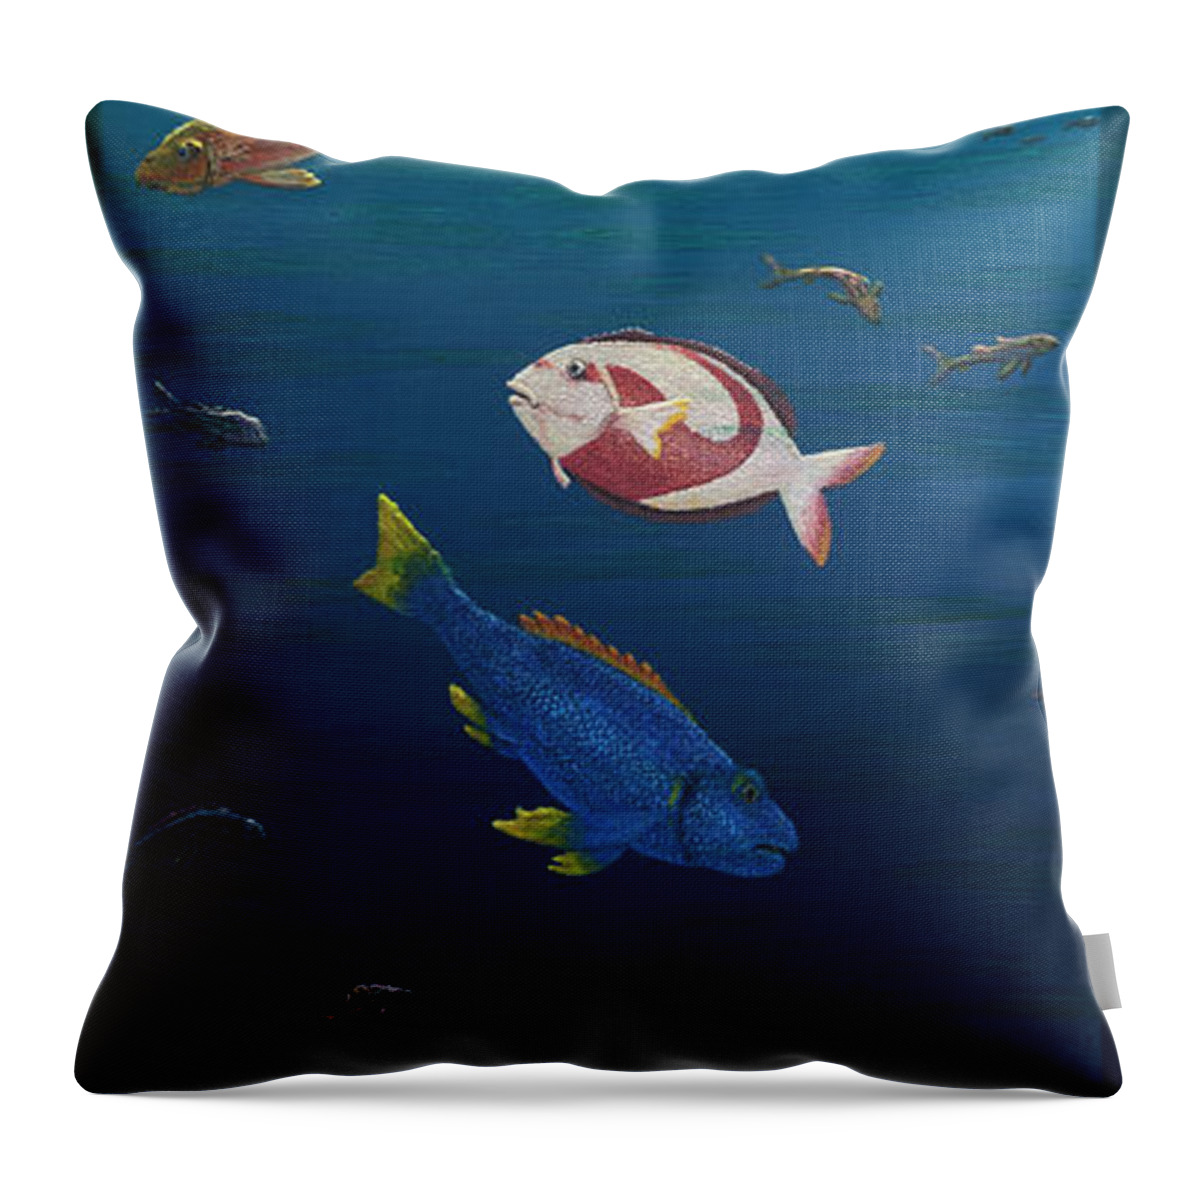 Fish. Lighted. Throw Pillow featuring the mixed media Beneath the Surface by Jon Carroll Otterson